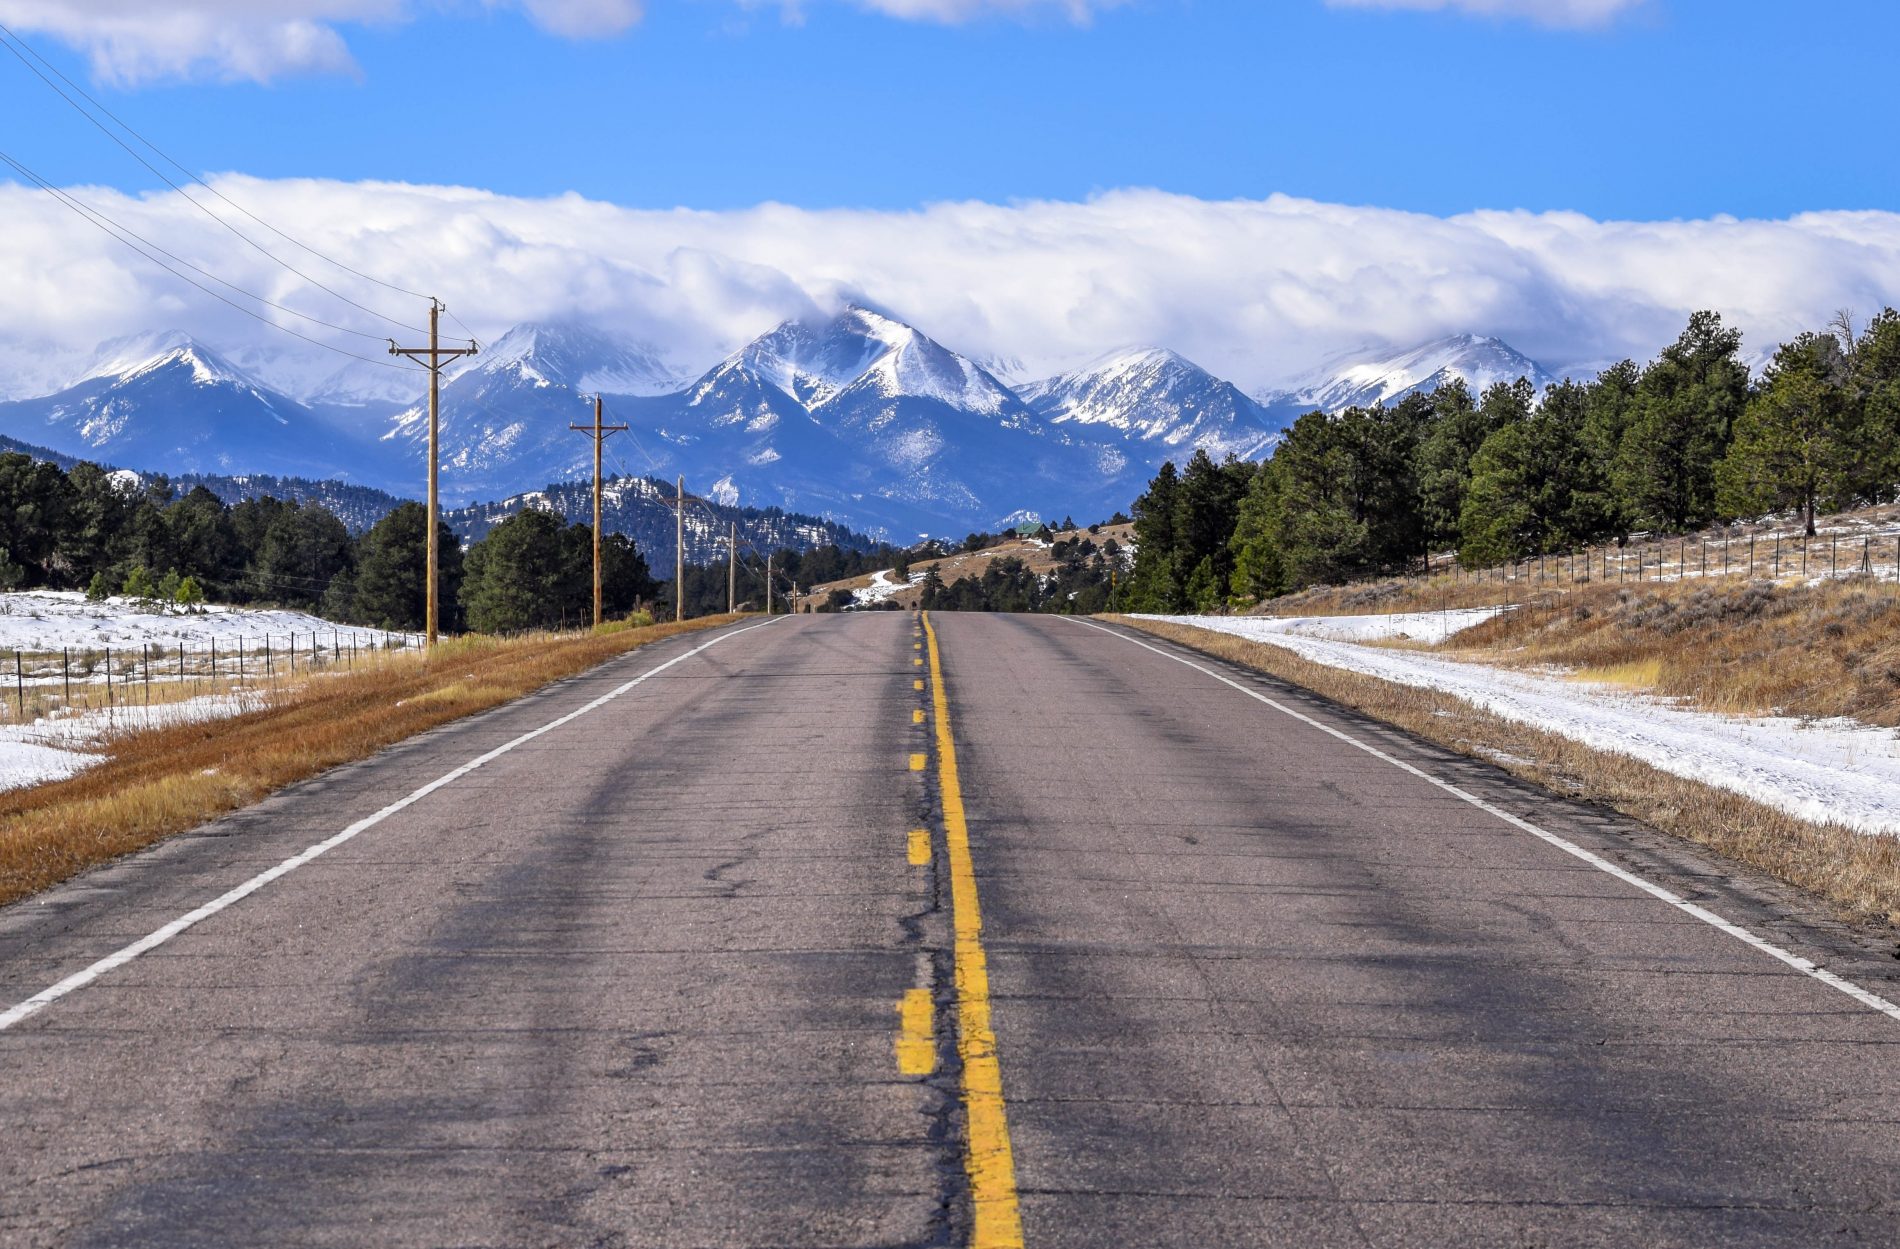 A clear road for hiking and whitewater rafting trips to the rocky snow caped Colorado mountains